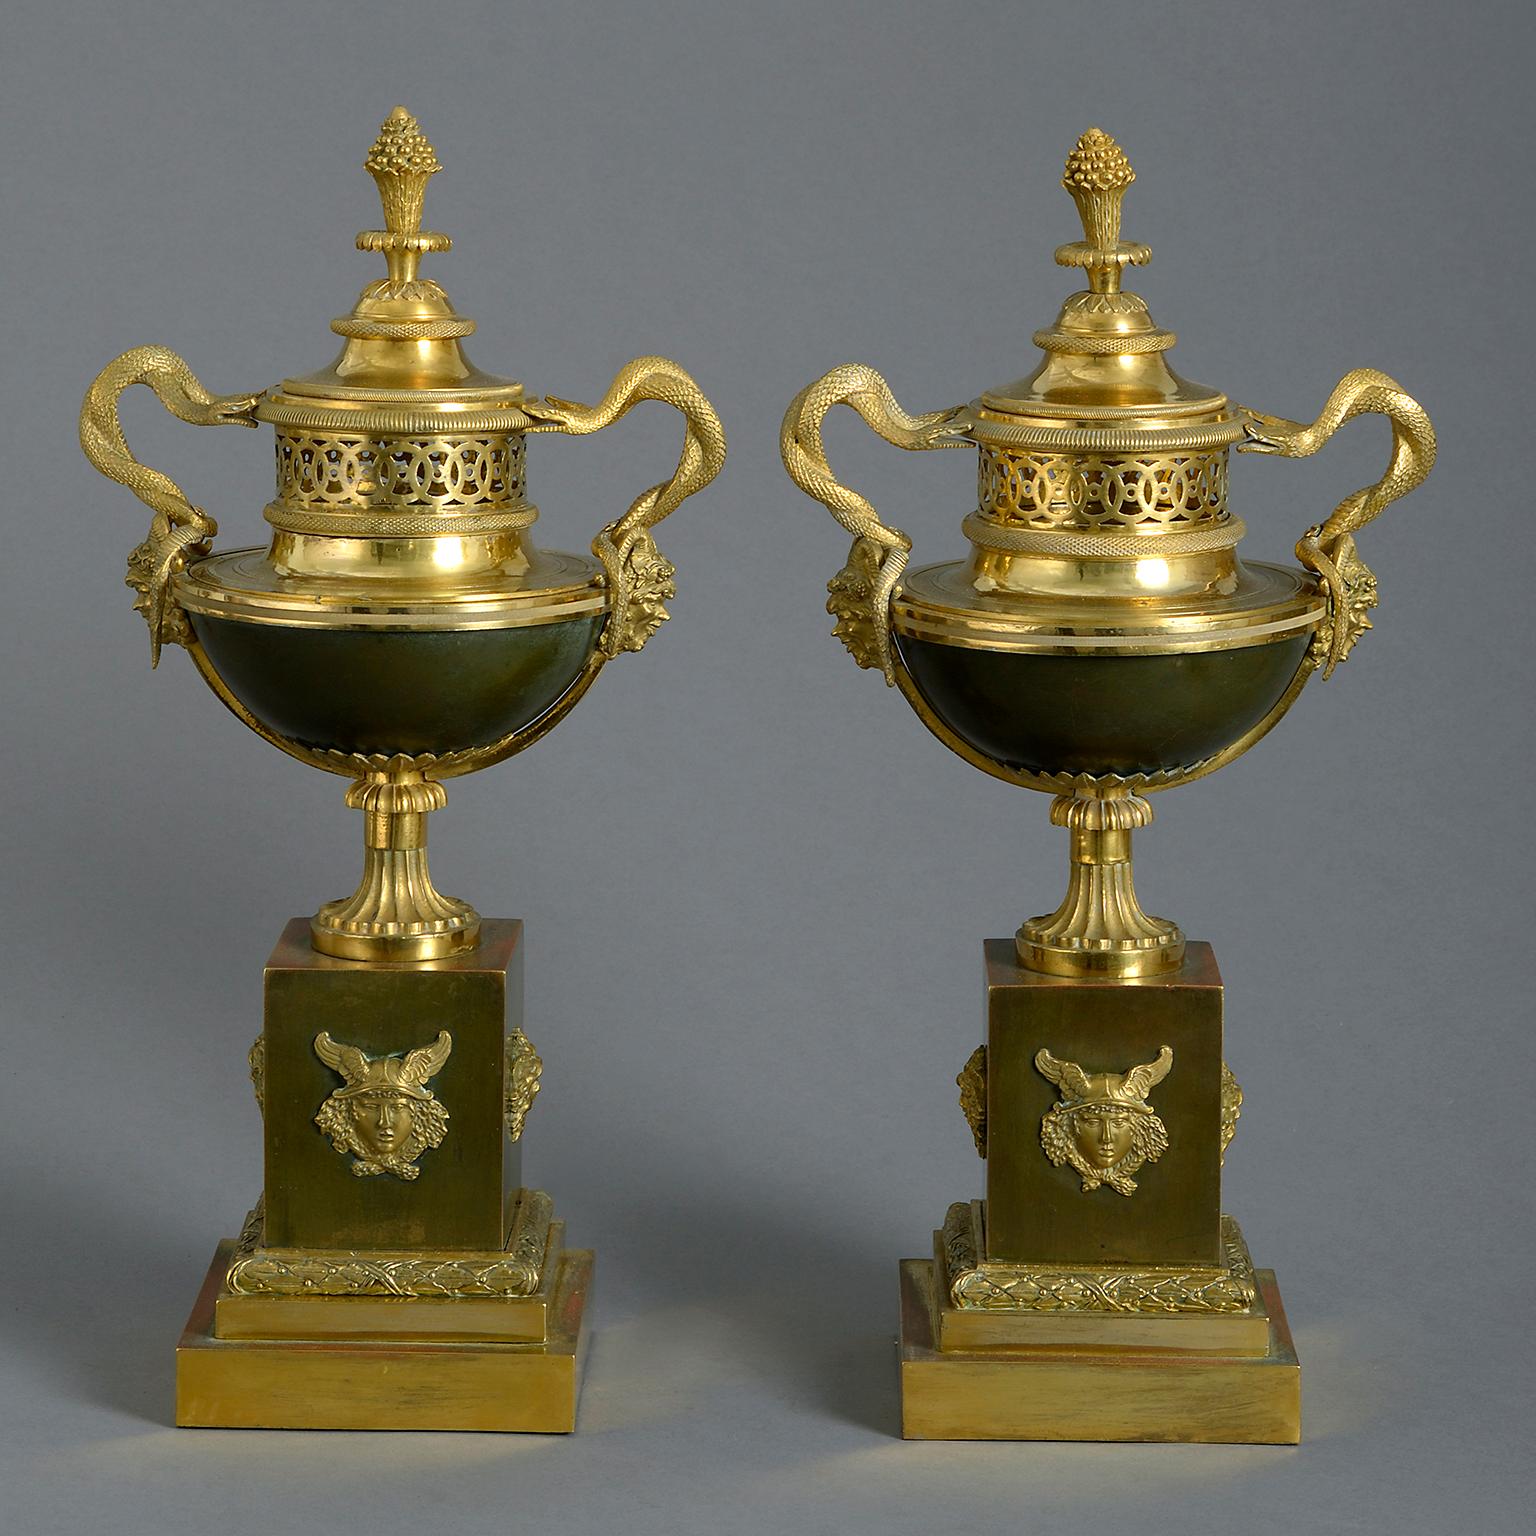 A pair of early 19th century bronze and ormolu perfume burners or pot-pourri vases of exceptional quality and in the celebrated form of Sevrés ‘Daguerre ovale’ or ‘cassolette à monter’. Each Brûle Parfum in the form of urns with pierced guilloche